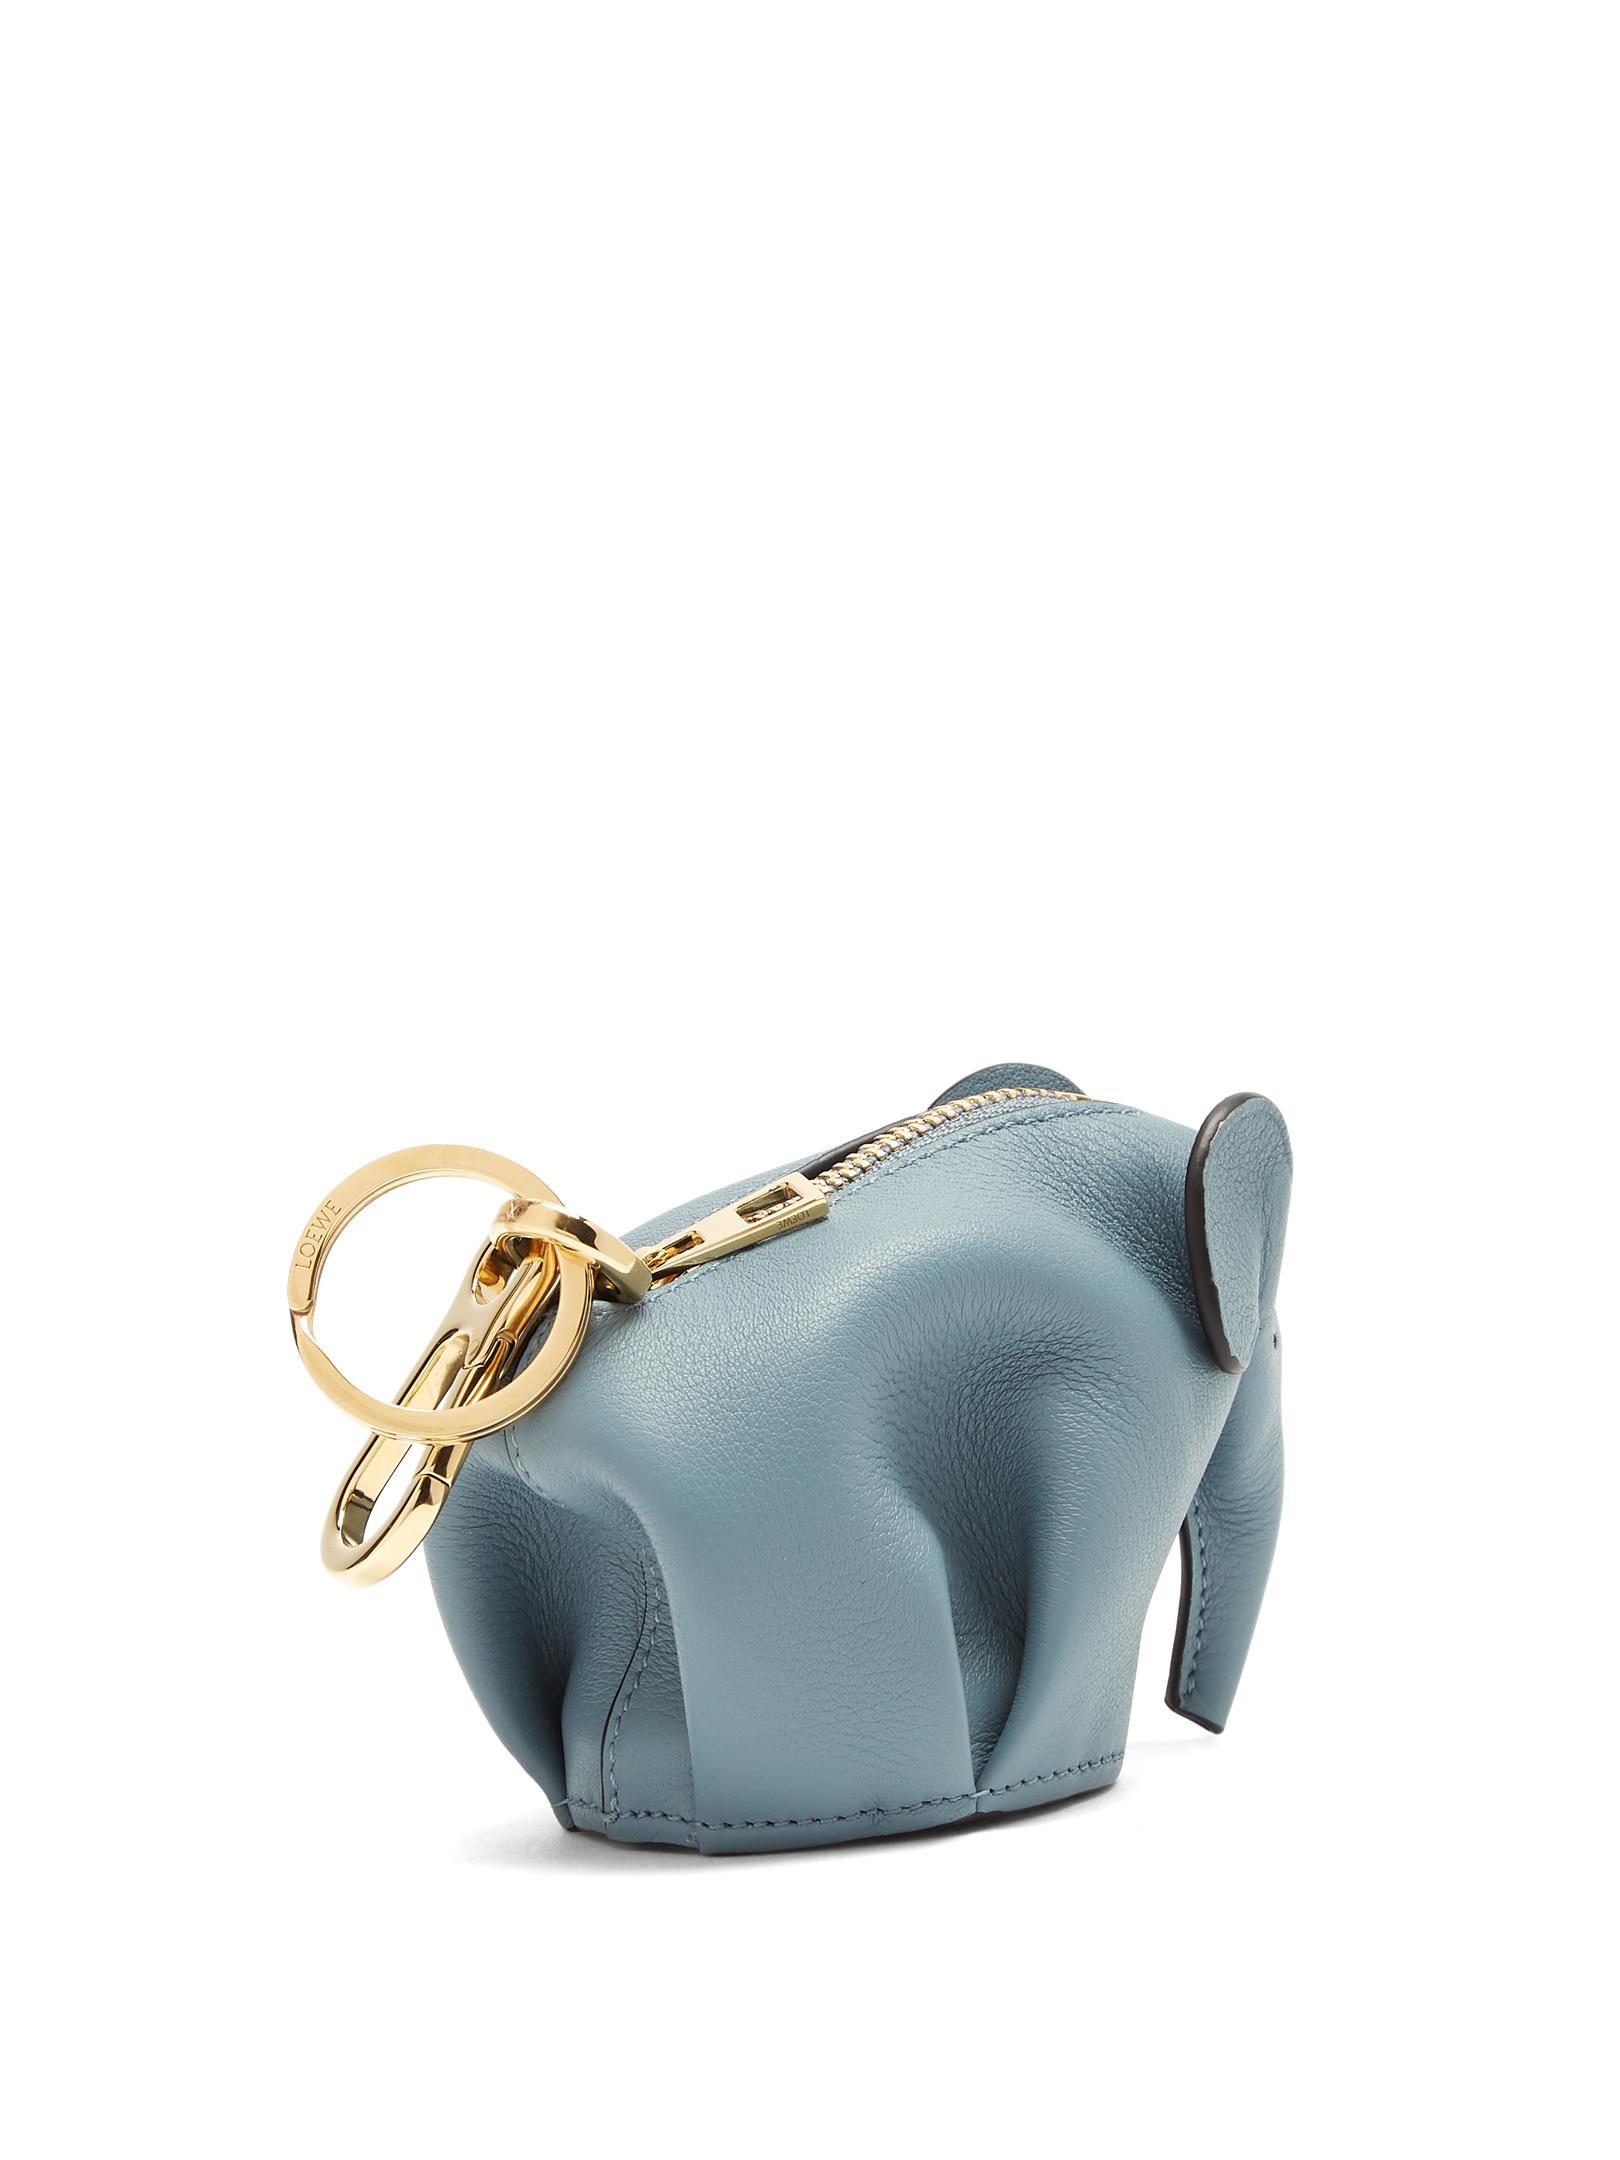 Loewe Leather Elephant Coin Purse in Blue - Lyst